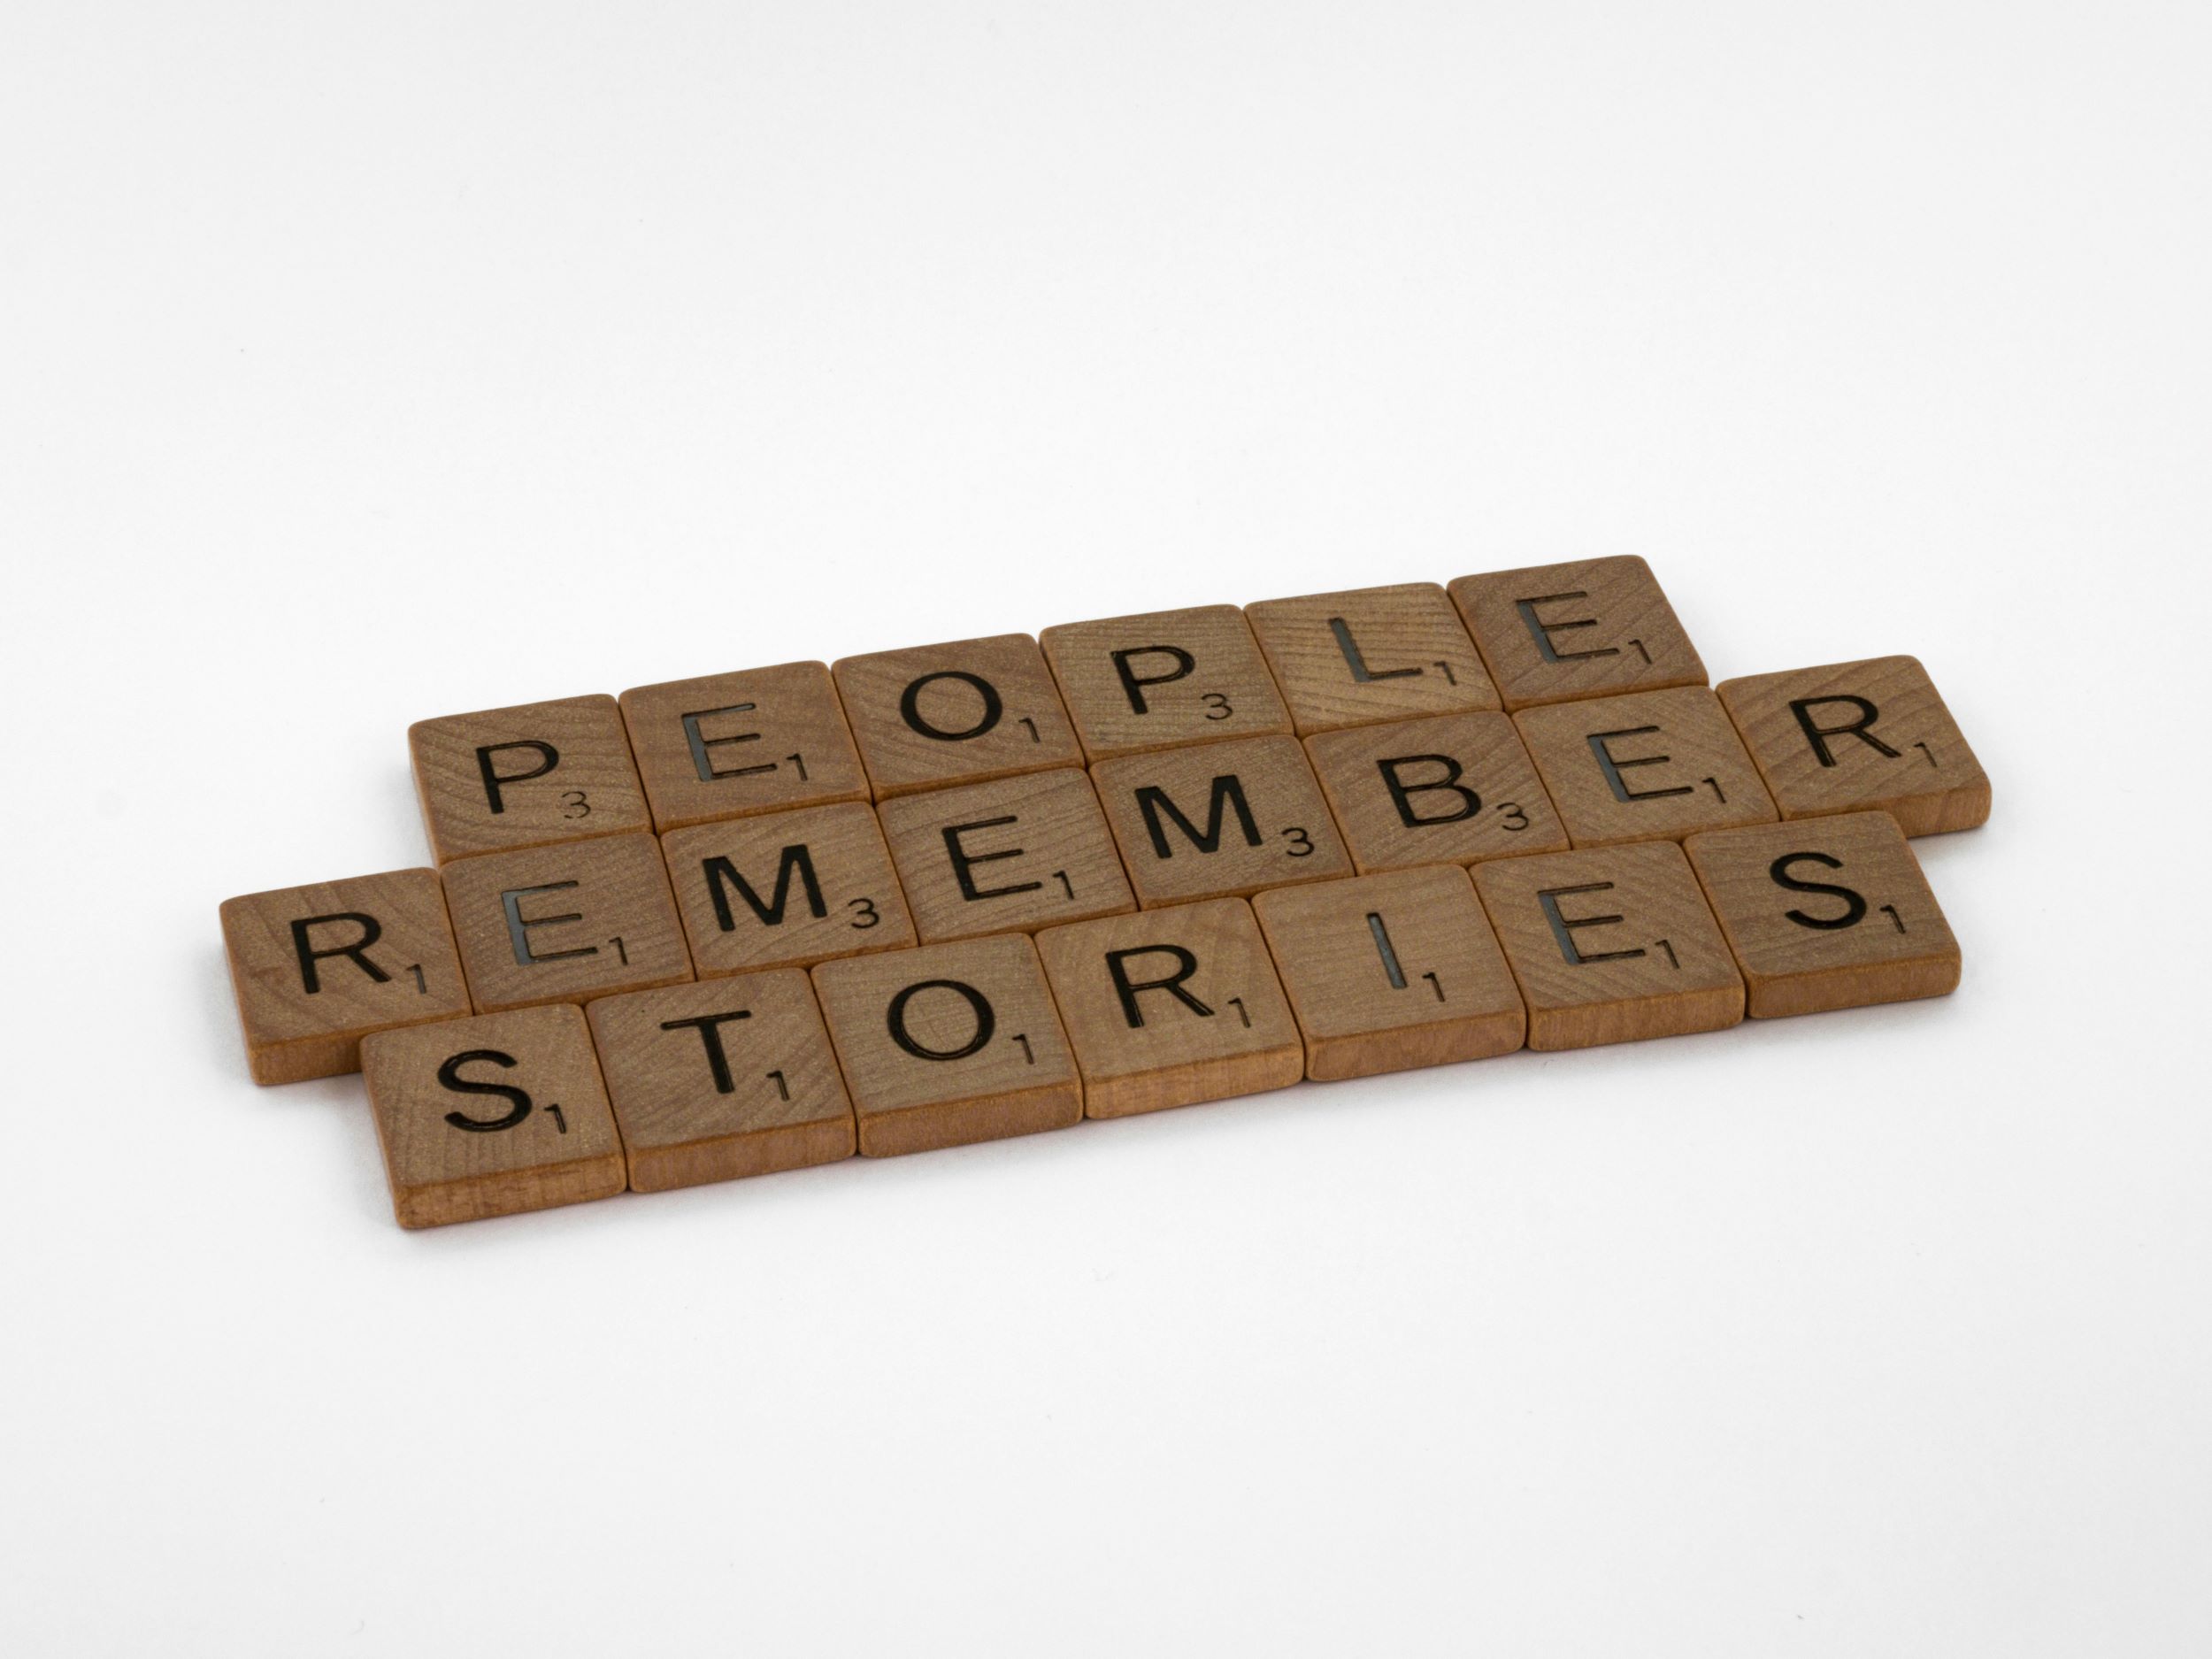 Scrabble tiles that spell "People remember stories"